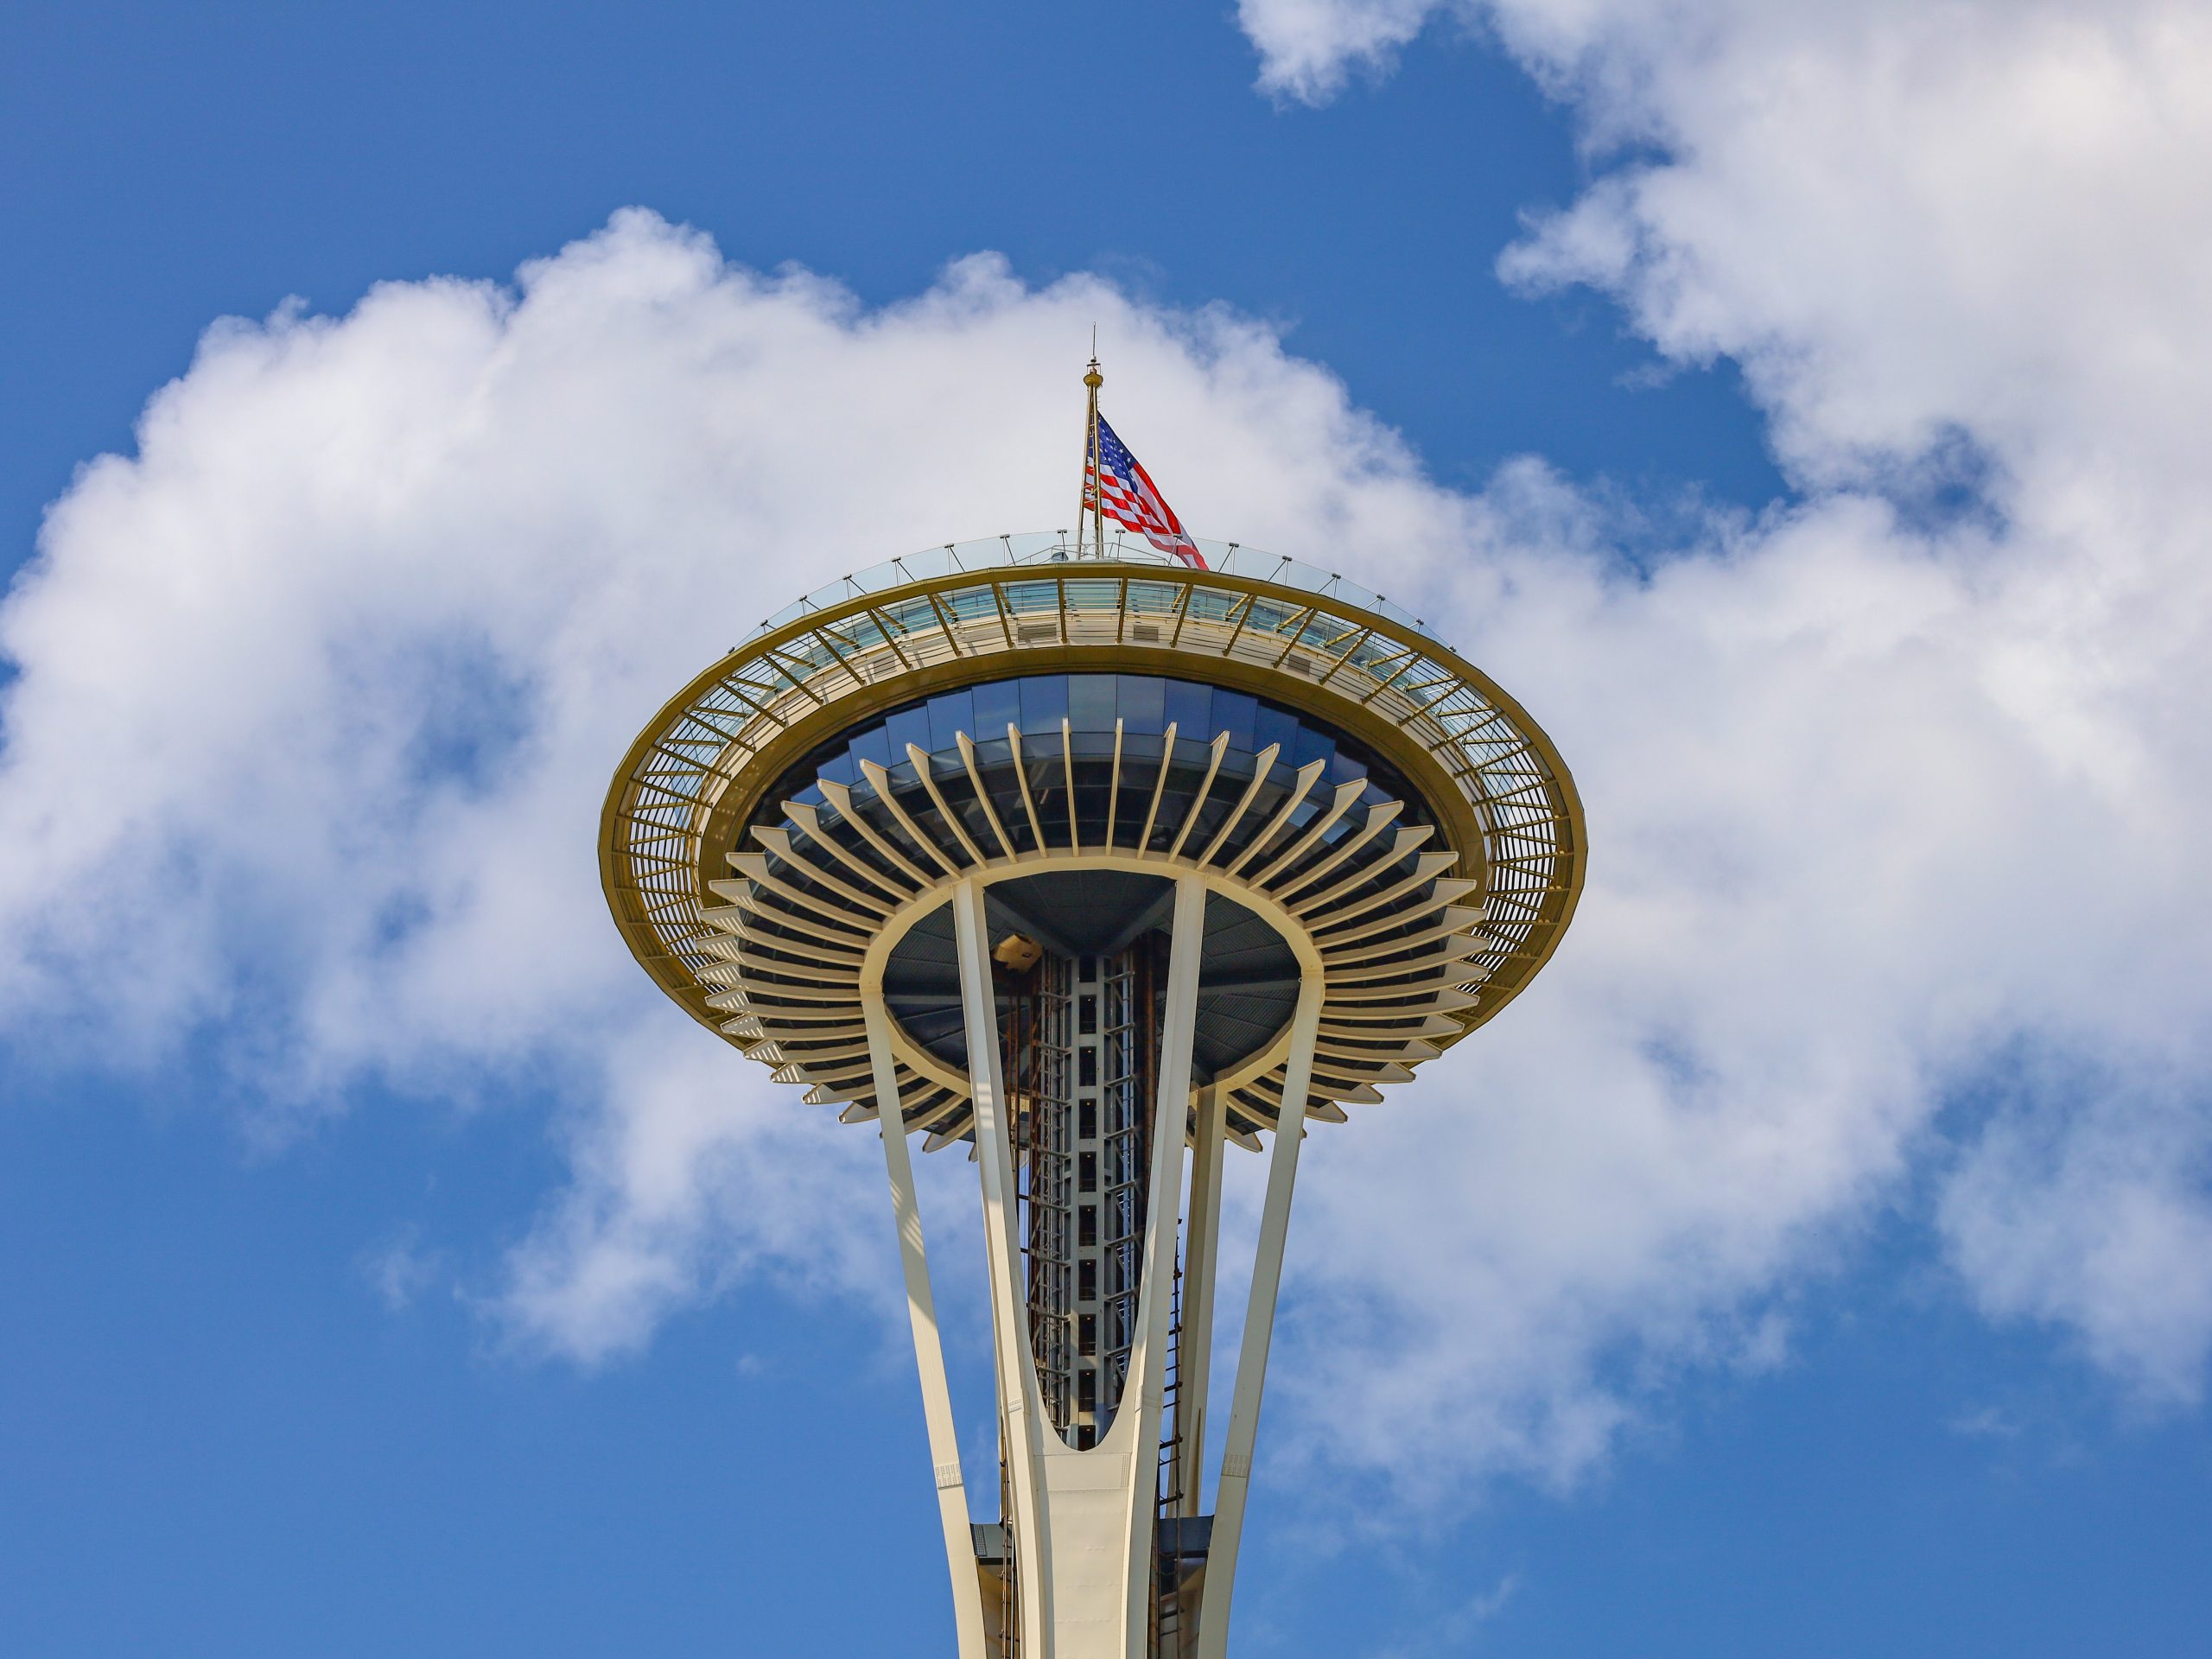 Family groups can enjoy spectacular city views from Seattle’s towering Space Needle. Photo courtesy of Pexels